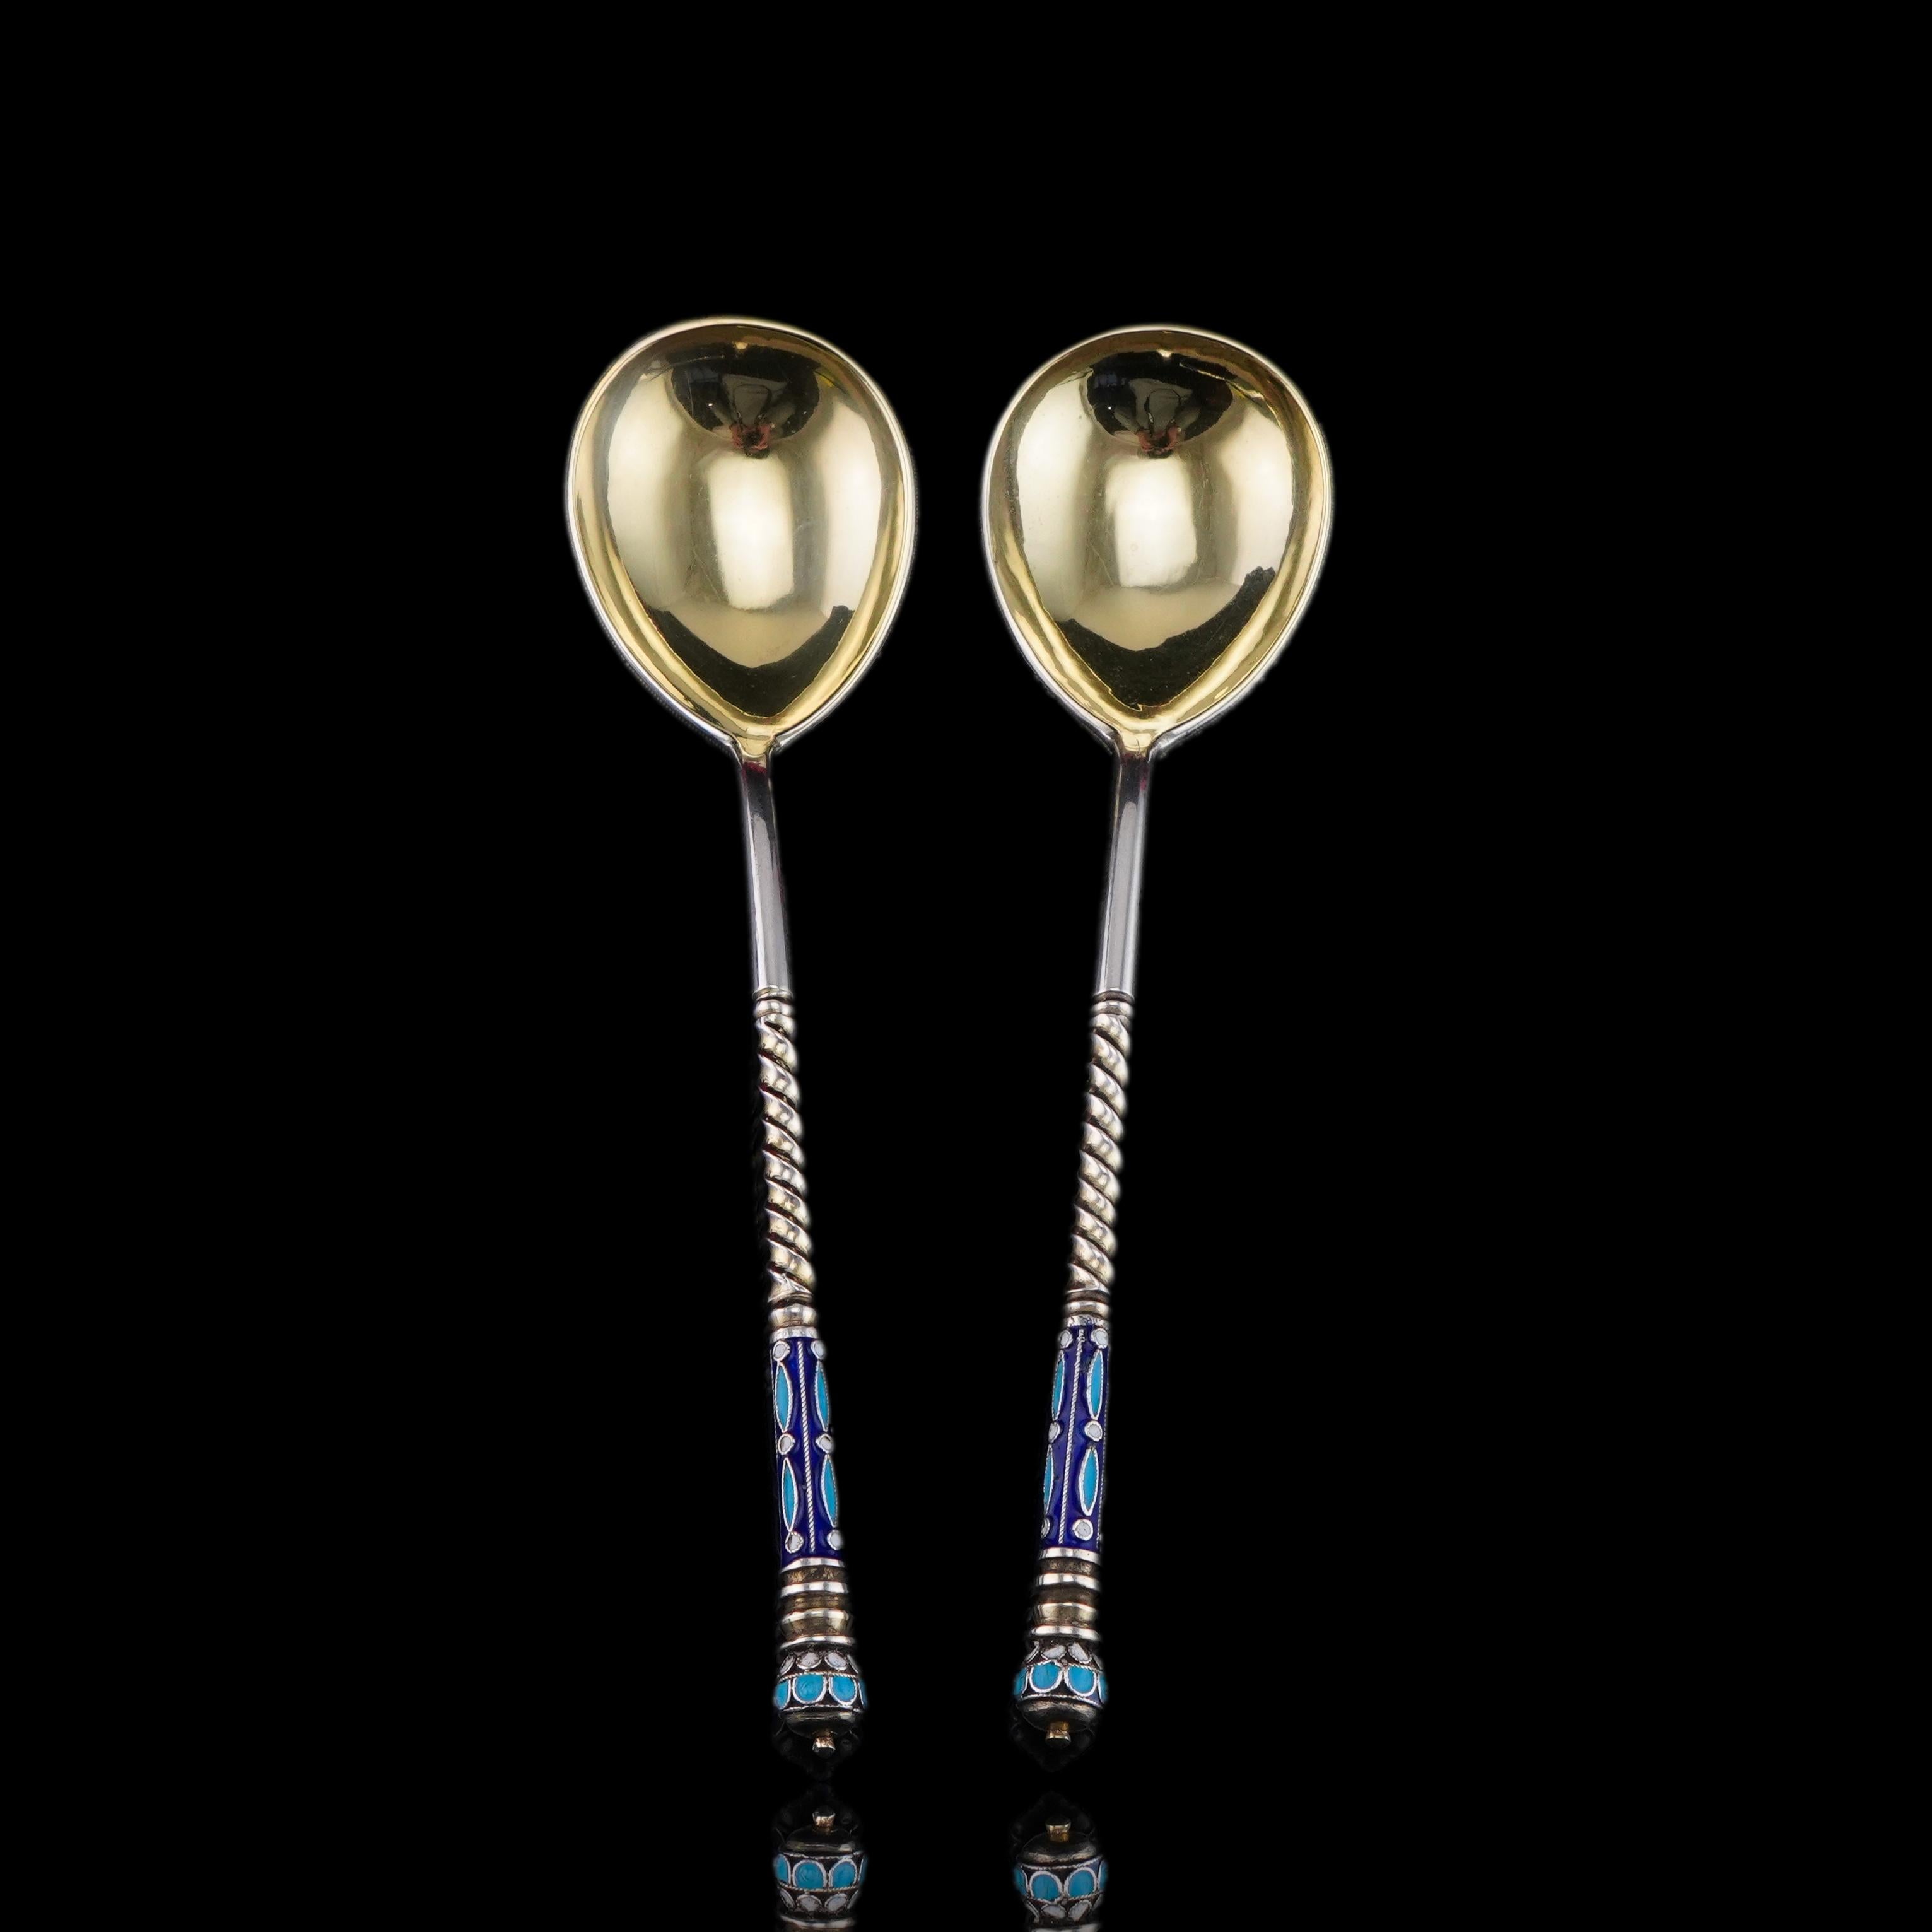 Antique Imperial Russian Solid Silver Spoons with Cloisonne Enamel c.1882 For Sale 15